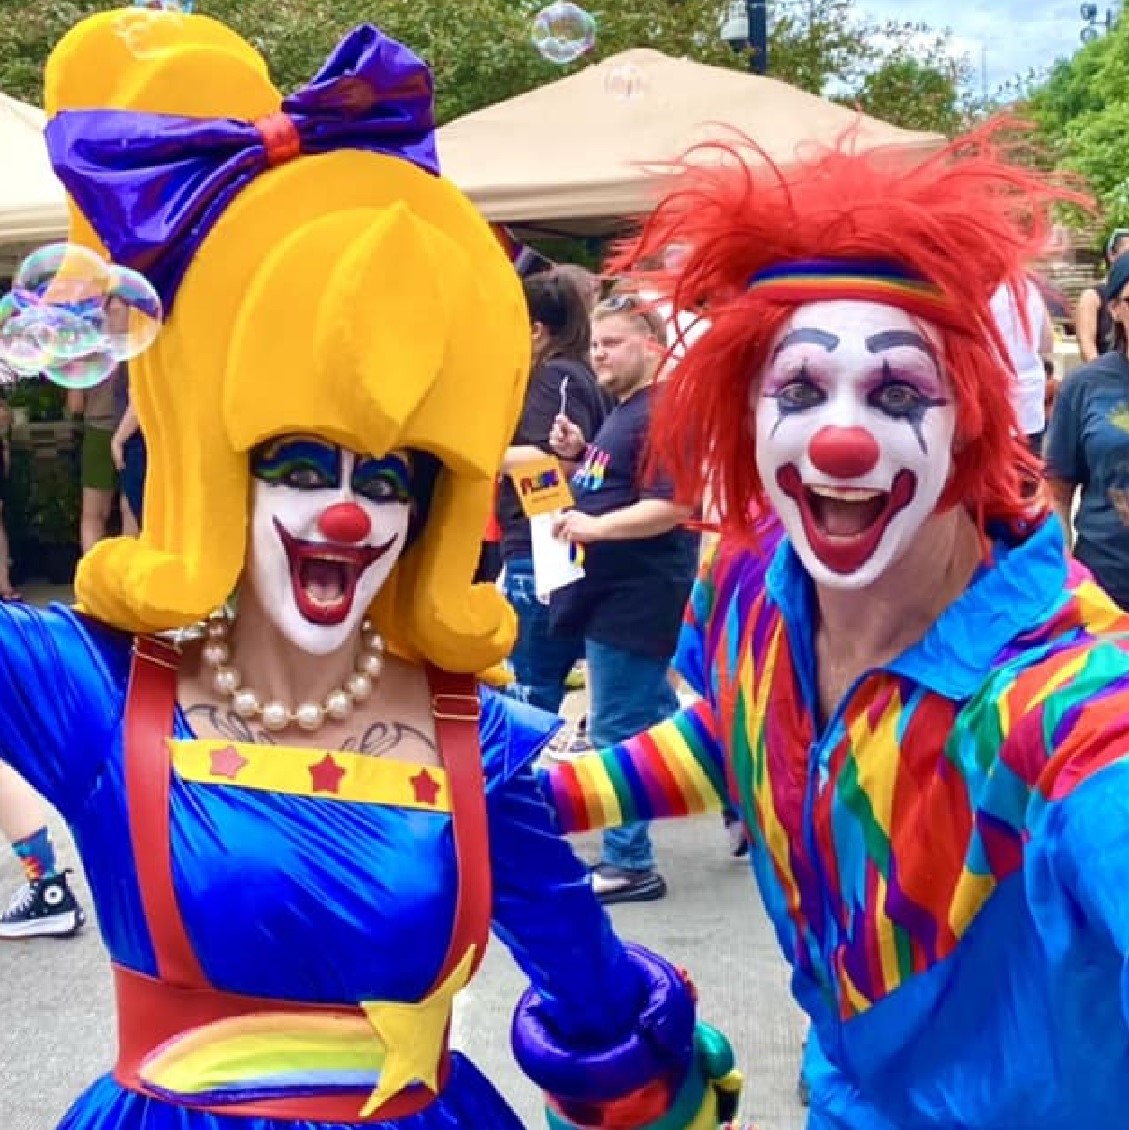 A woman and man dressed as clowns